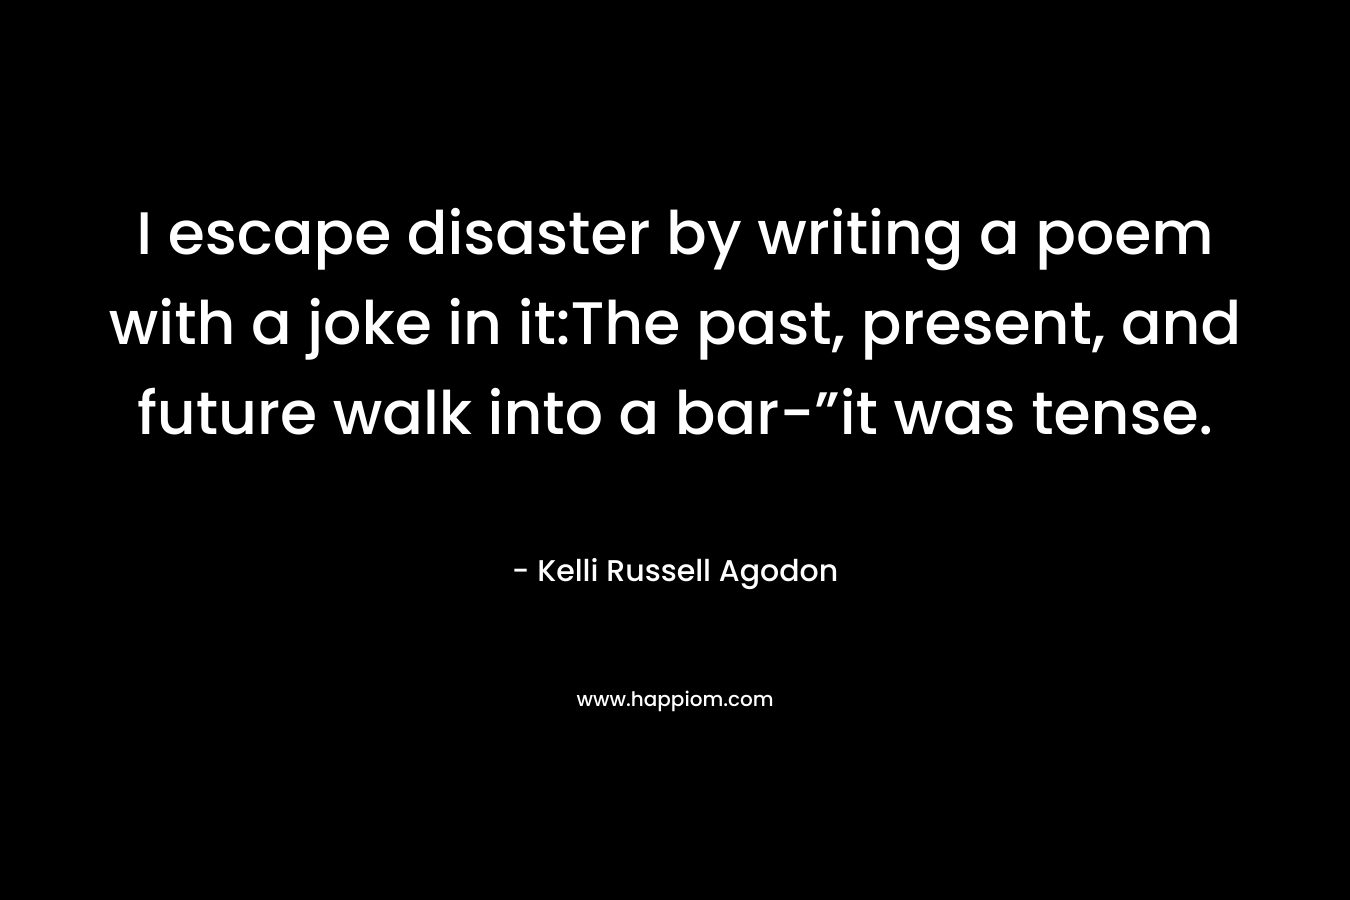 I escape disaster by writing a poem with a joke in it:The past, present, and future walk into a bar-”it was tense. – Kelli Russell Agodon